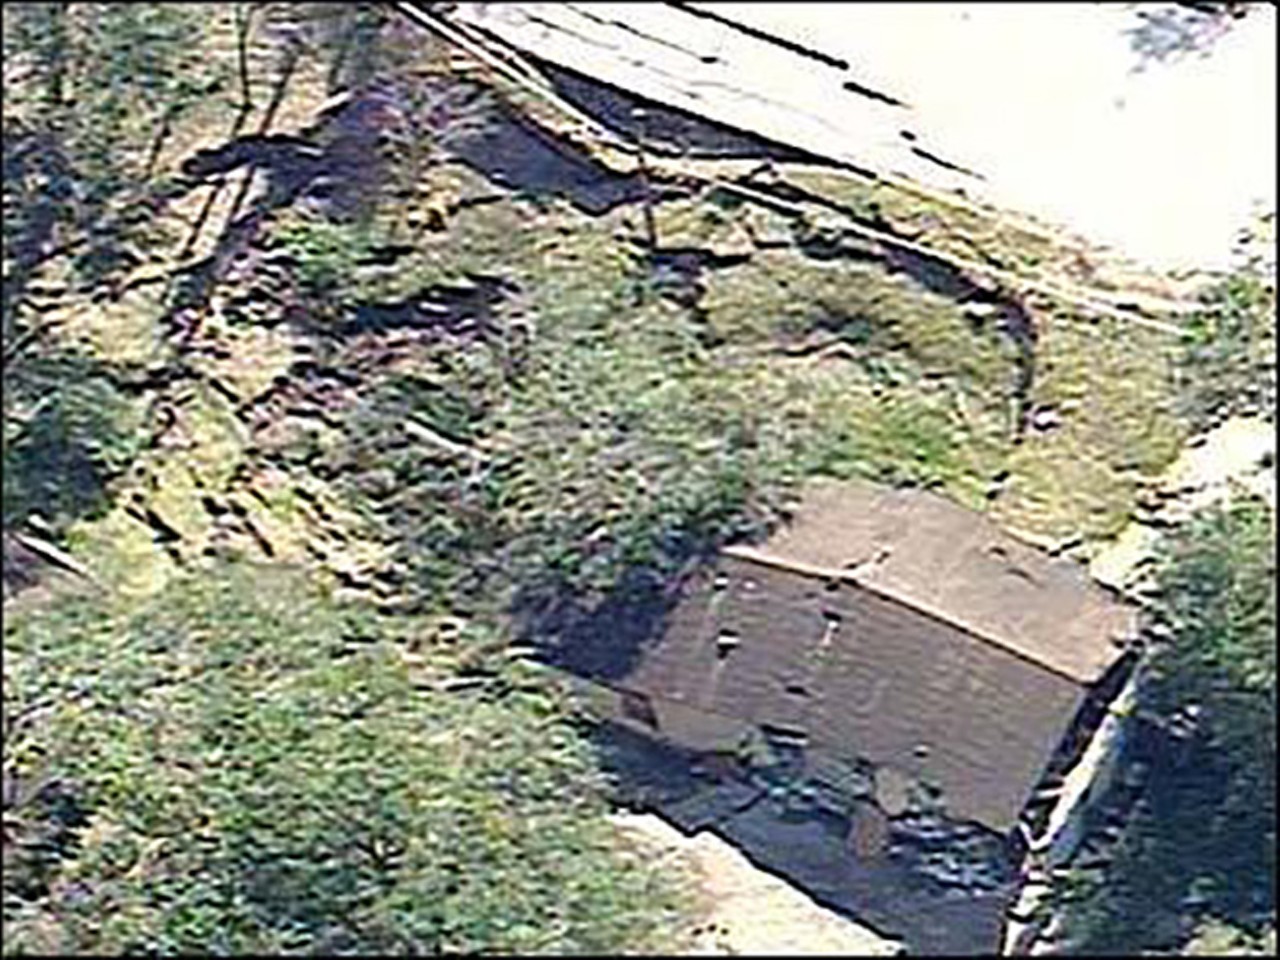 Massive sinkhole opens up in Orange City, Fla.
January 10, 2005
A 110-foot wide sinkhole completely destroyed the home of a young mother in Orange City, Fla. while also heavily damaging the neighboring house. Luckily, the mother and her baby weren't home when the sinkhole opened up.
Photo via wftv.com